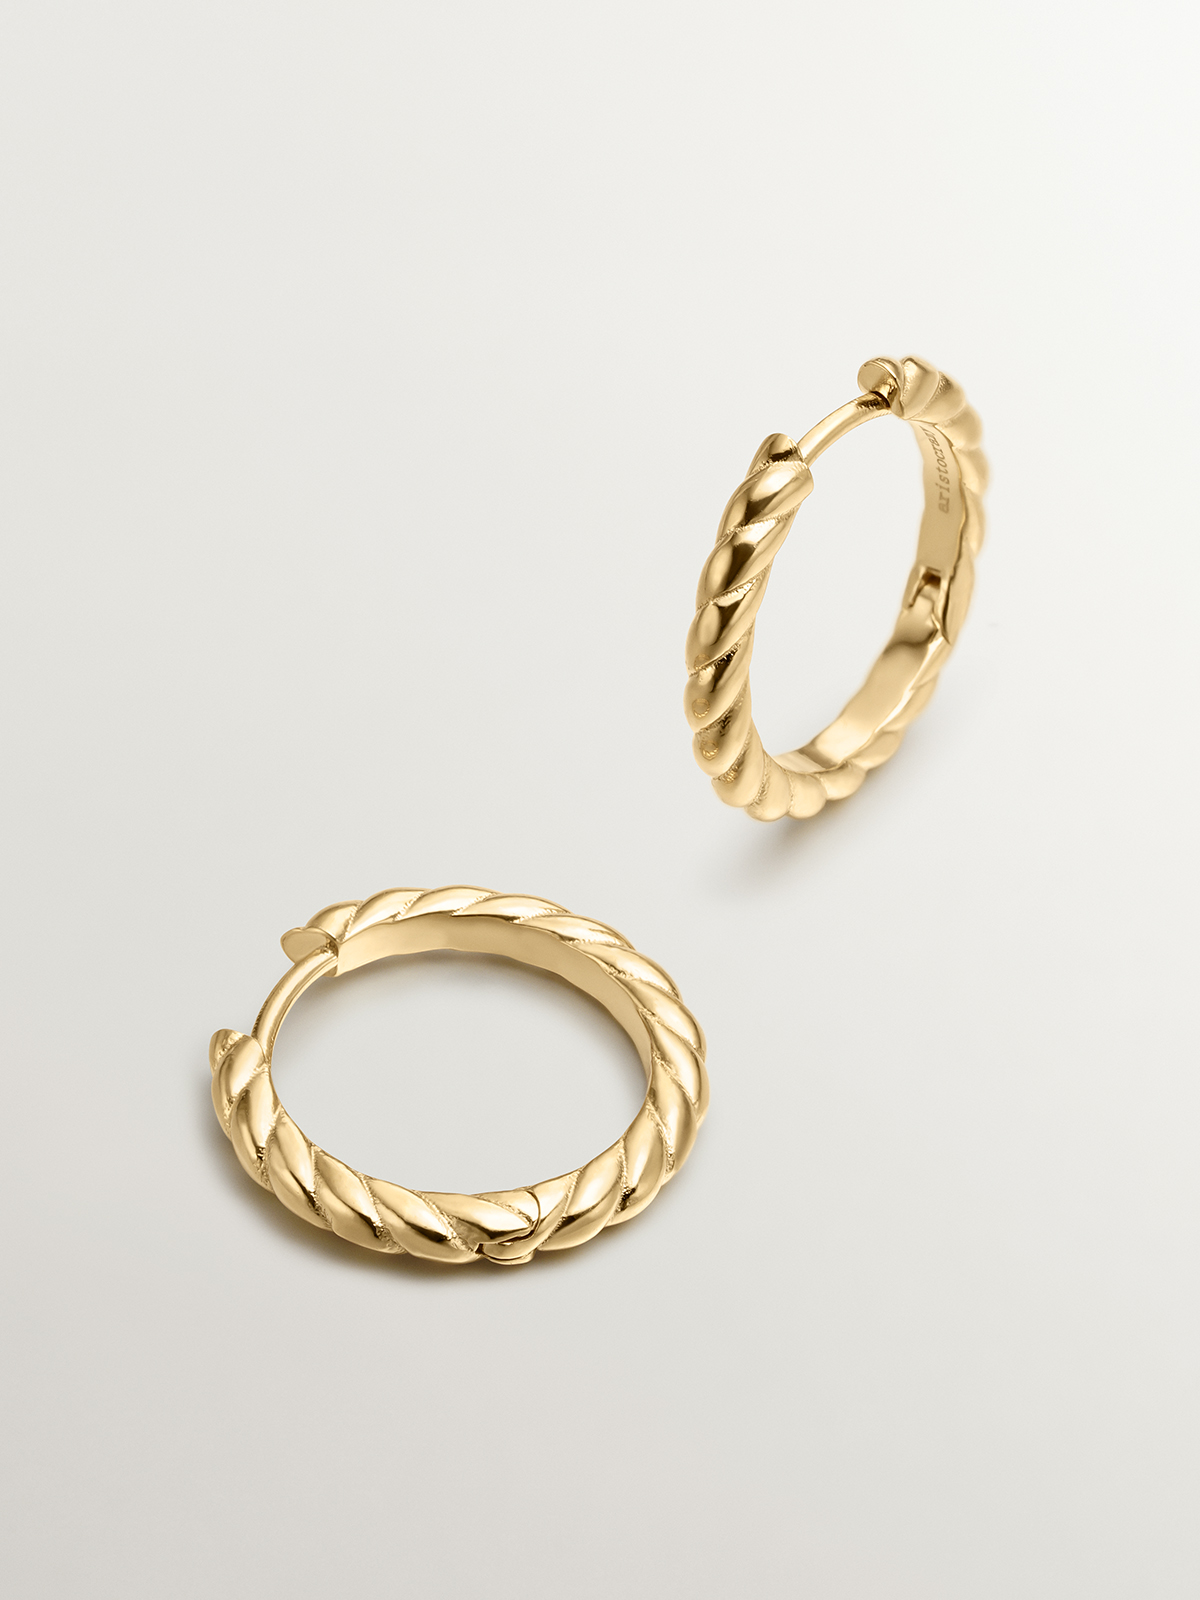 Silver ring earrings 925 bathed in 18k yellow gold